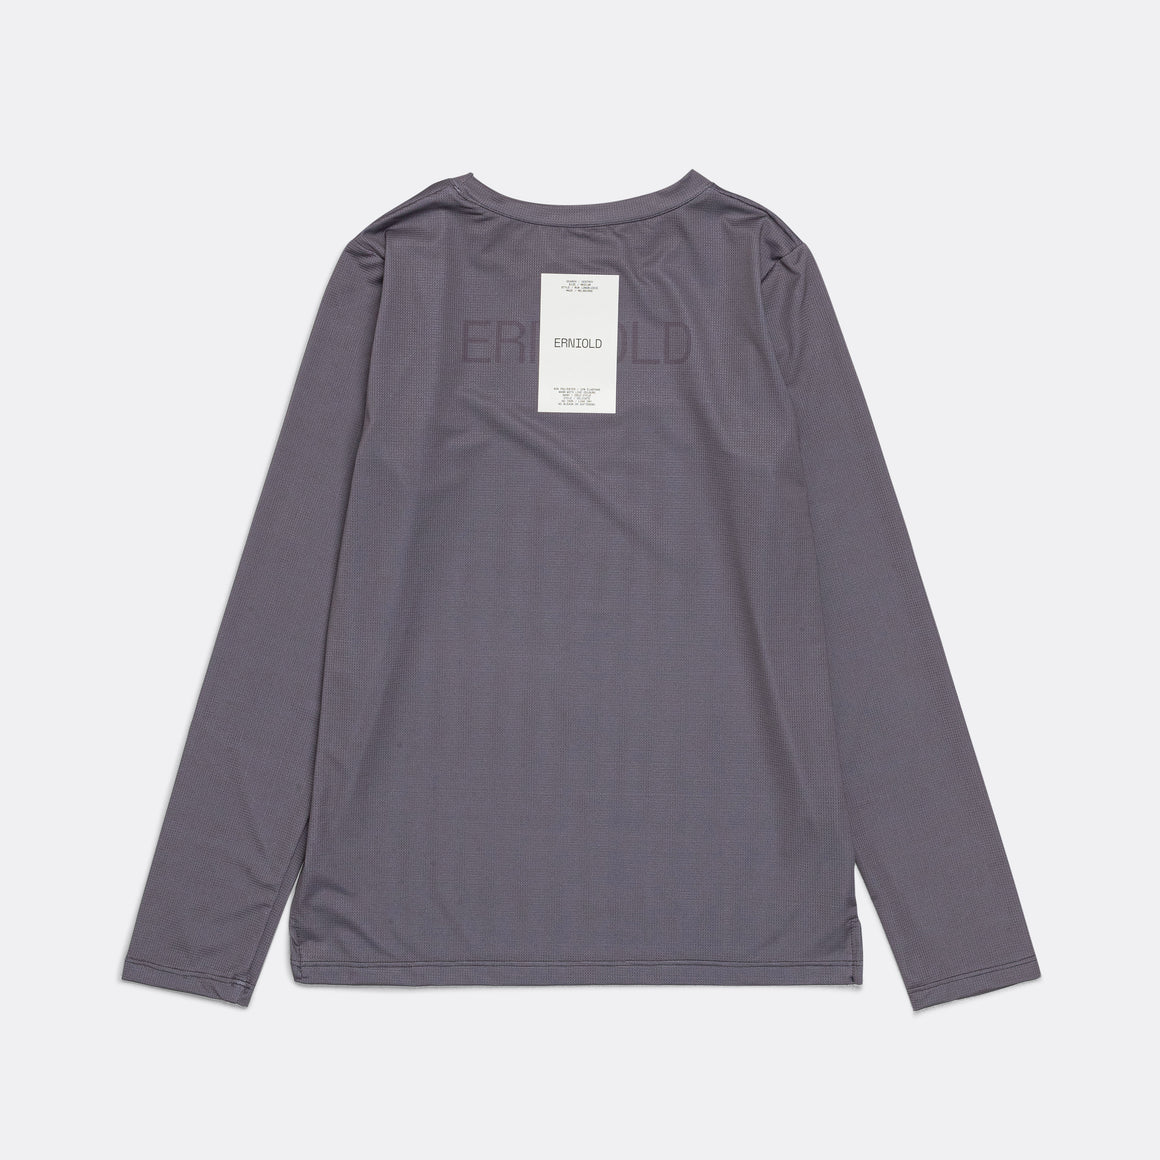 Erniold - Womens LS Run Tee - Dusk - Up There Athletics